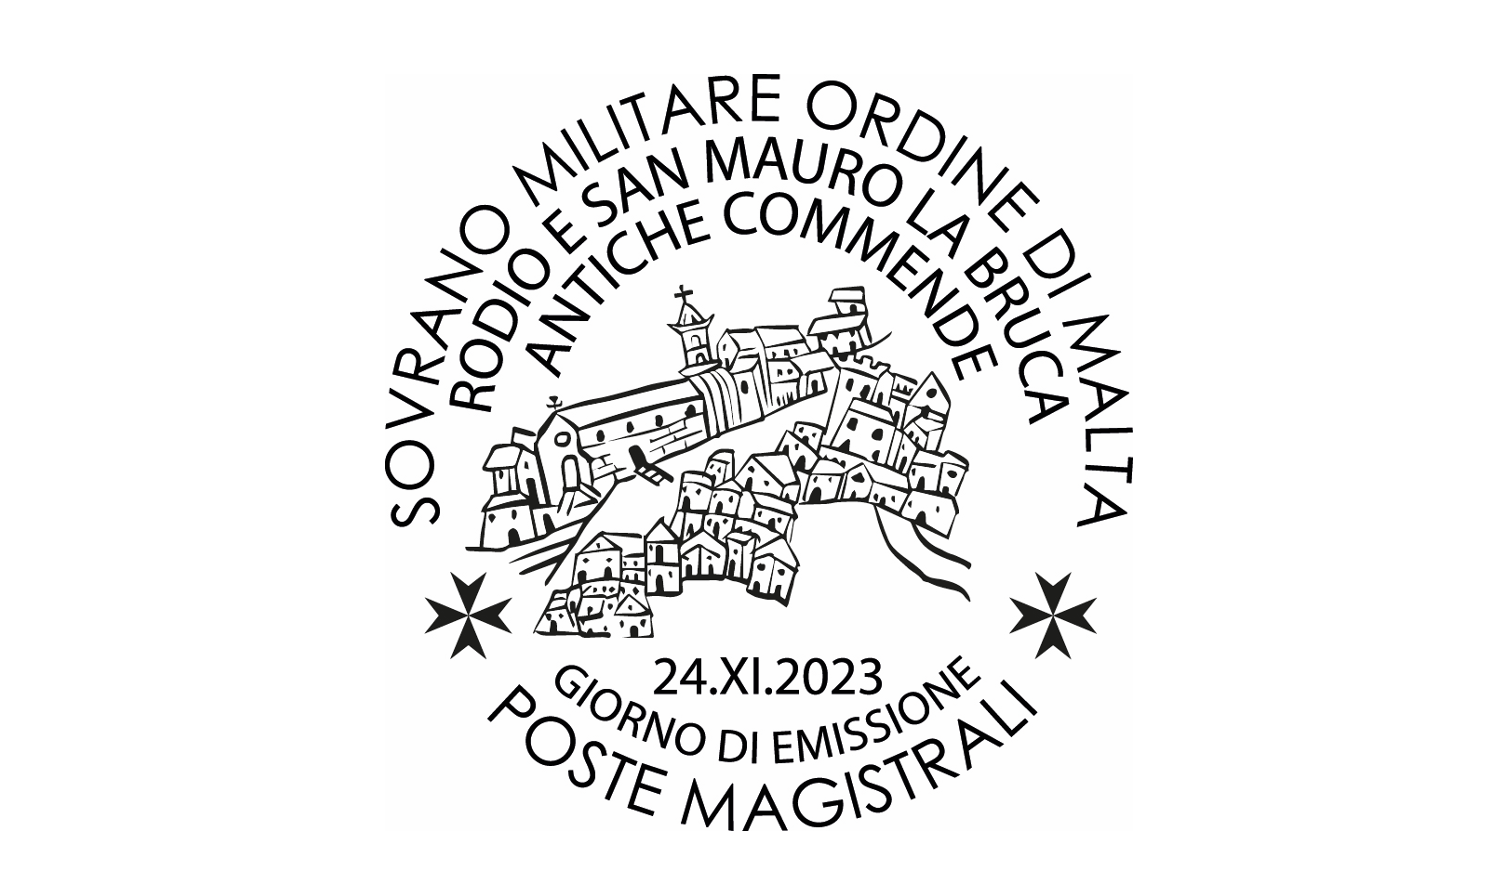 First day of issue postmark – The churches and commanderies of the Order: the old Commanderies of Rodio and San Mauro la Bruca